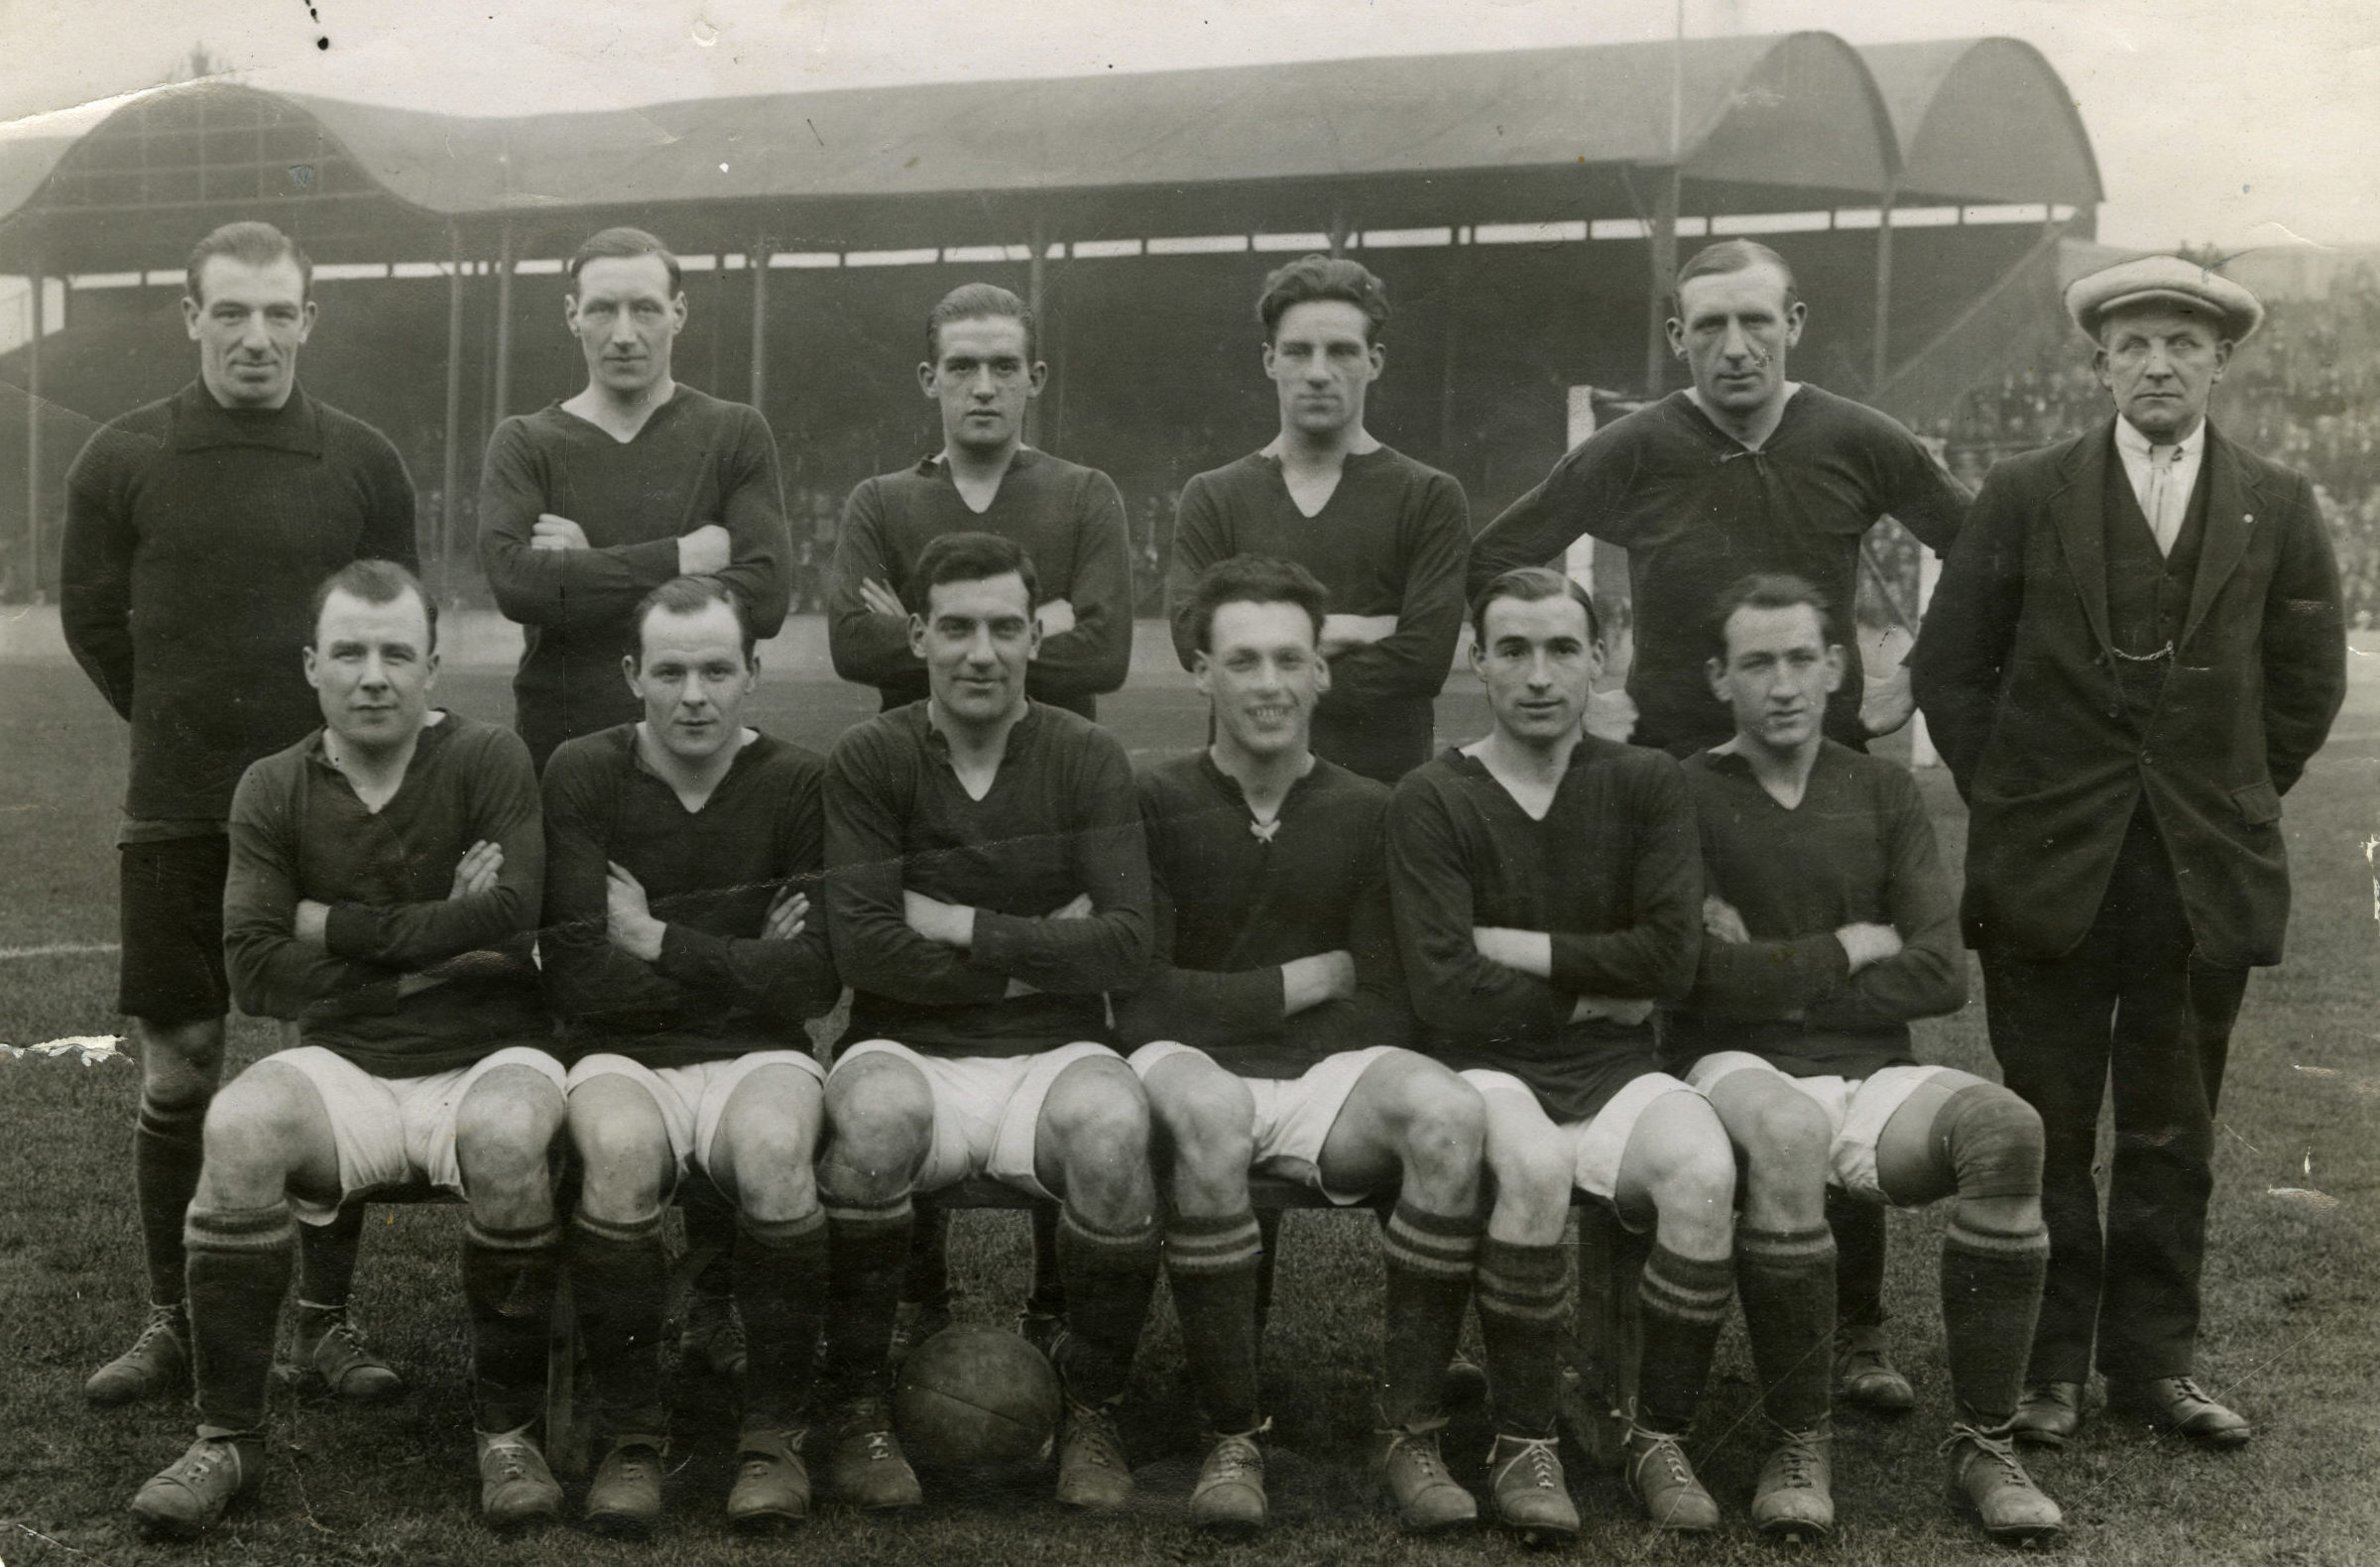 Jennings, back row, third from left, in the Raith Rovers team before he was sold to Leeds.